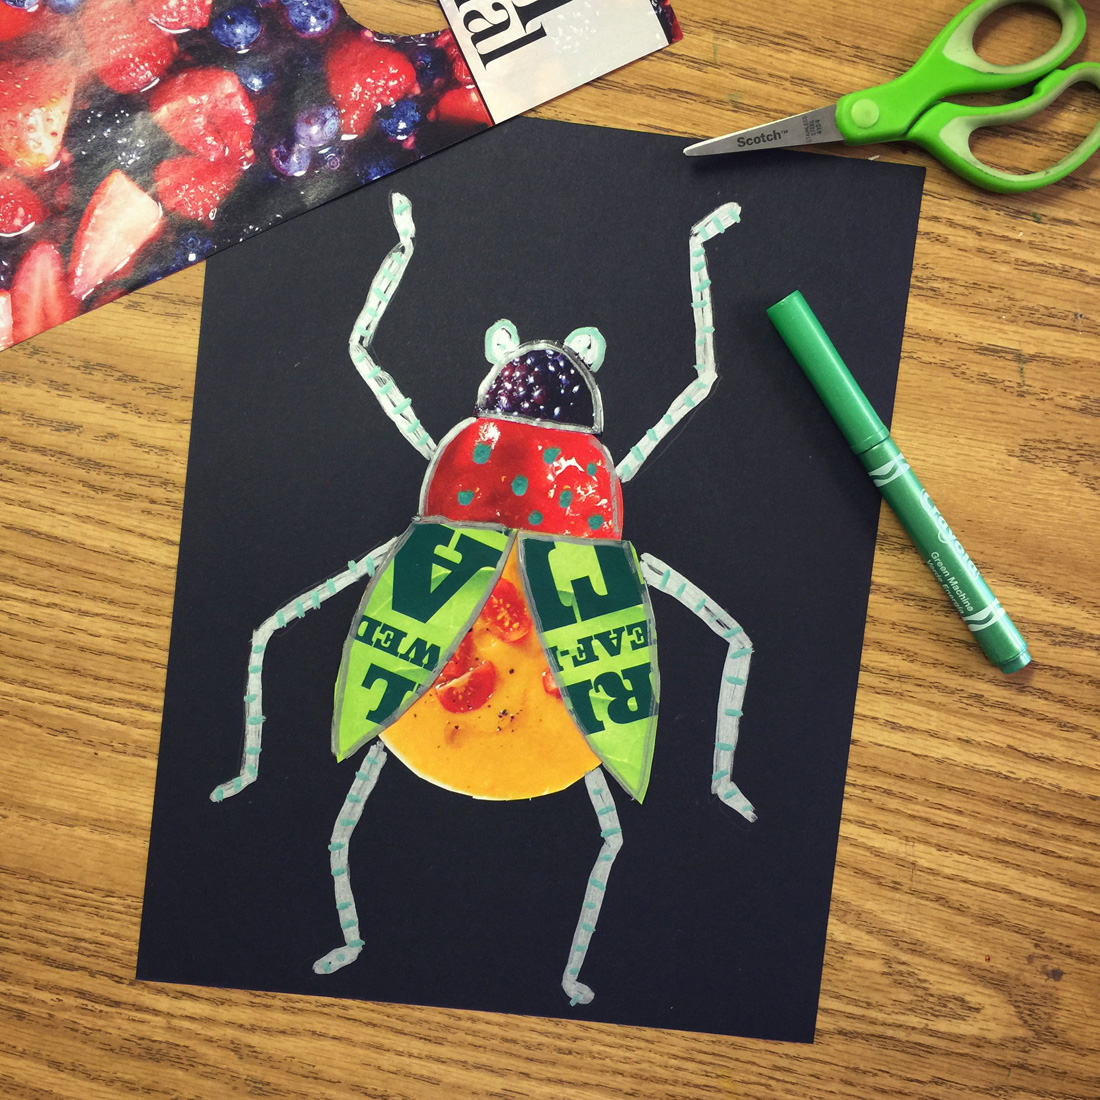 Bug Art Projects 6